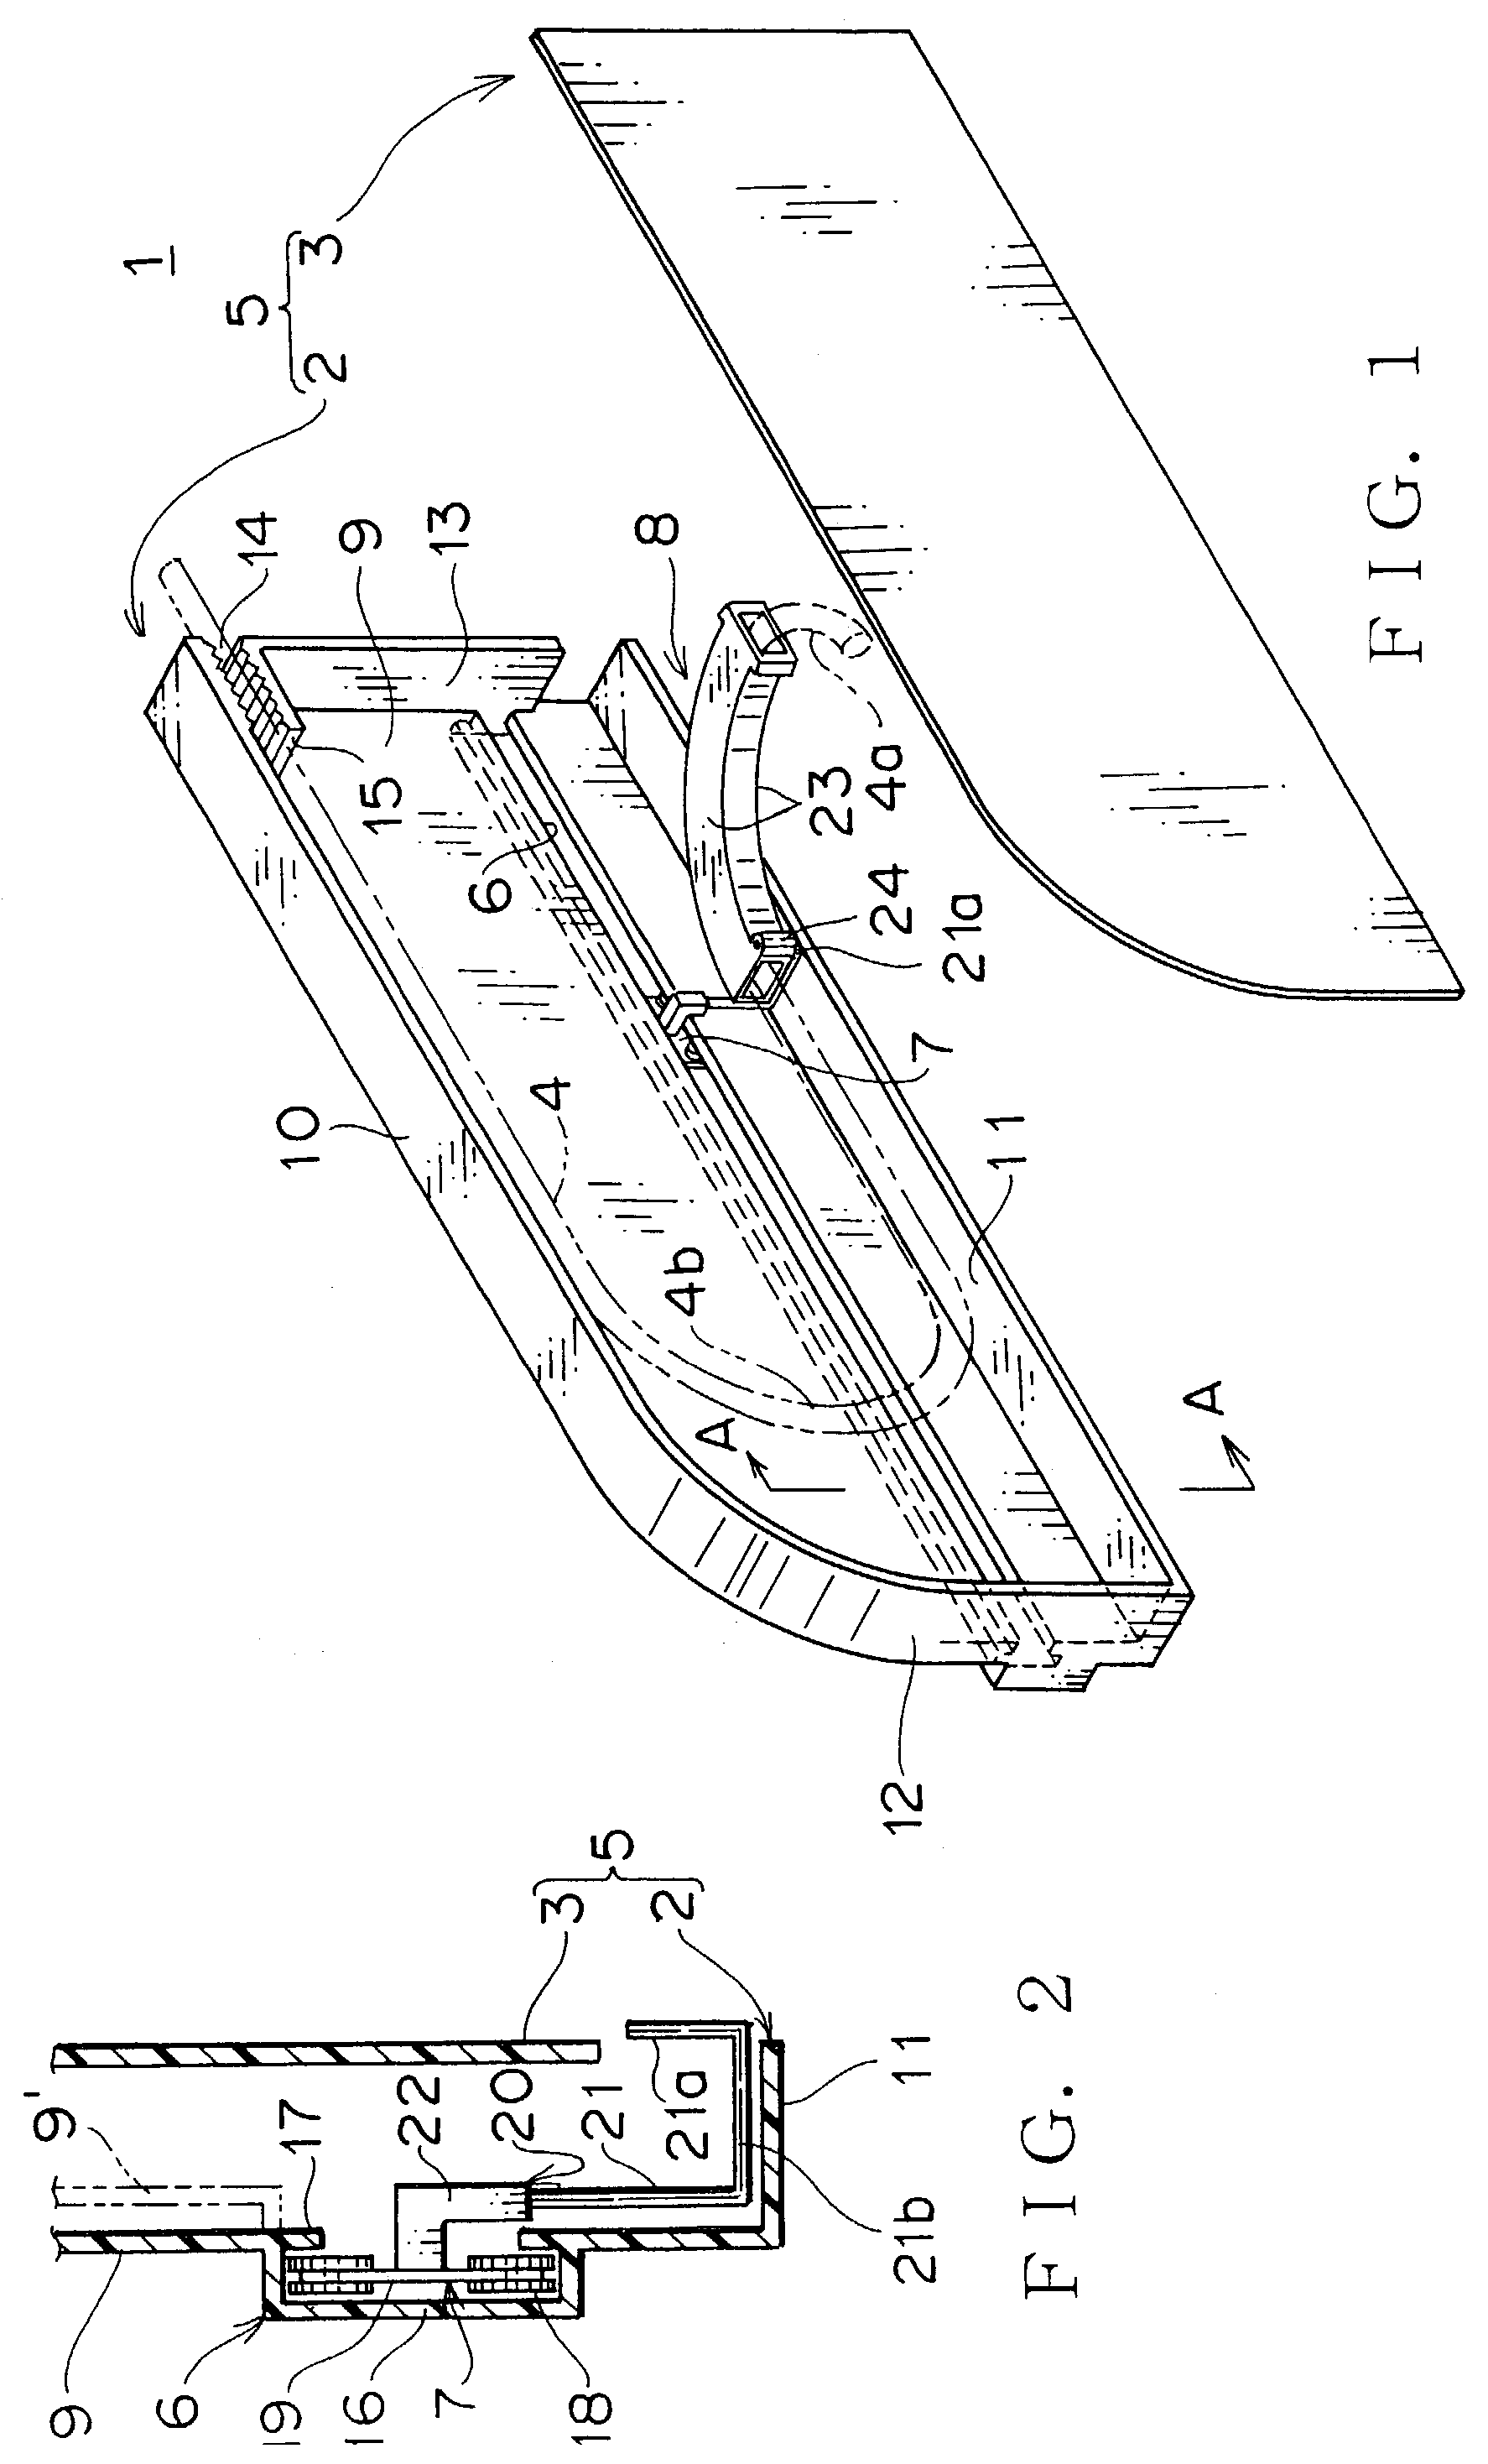 Power-supply wiring device and harness layout structure by the power-supply wiring device